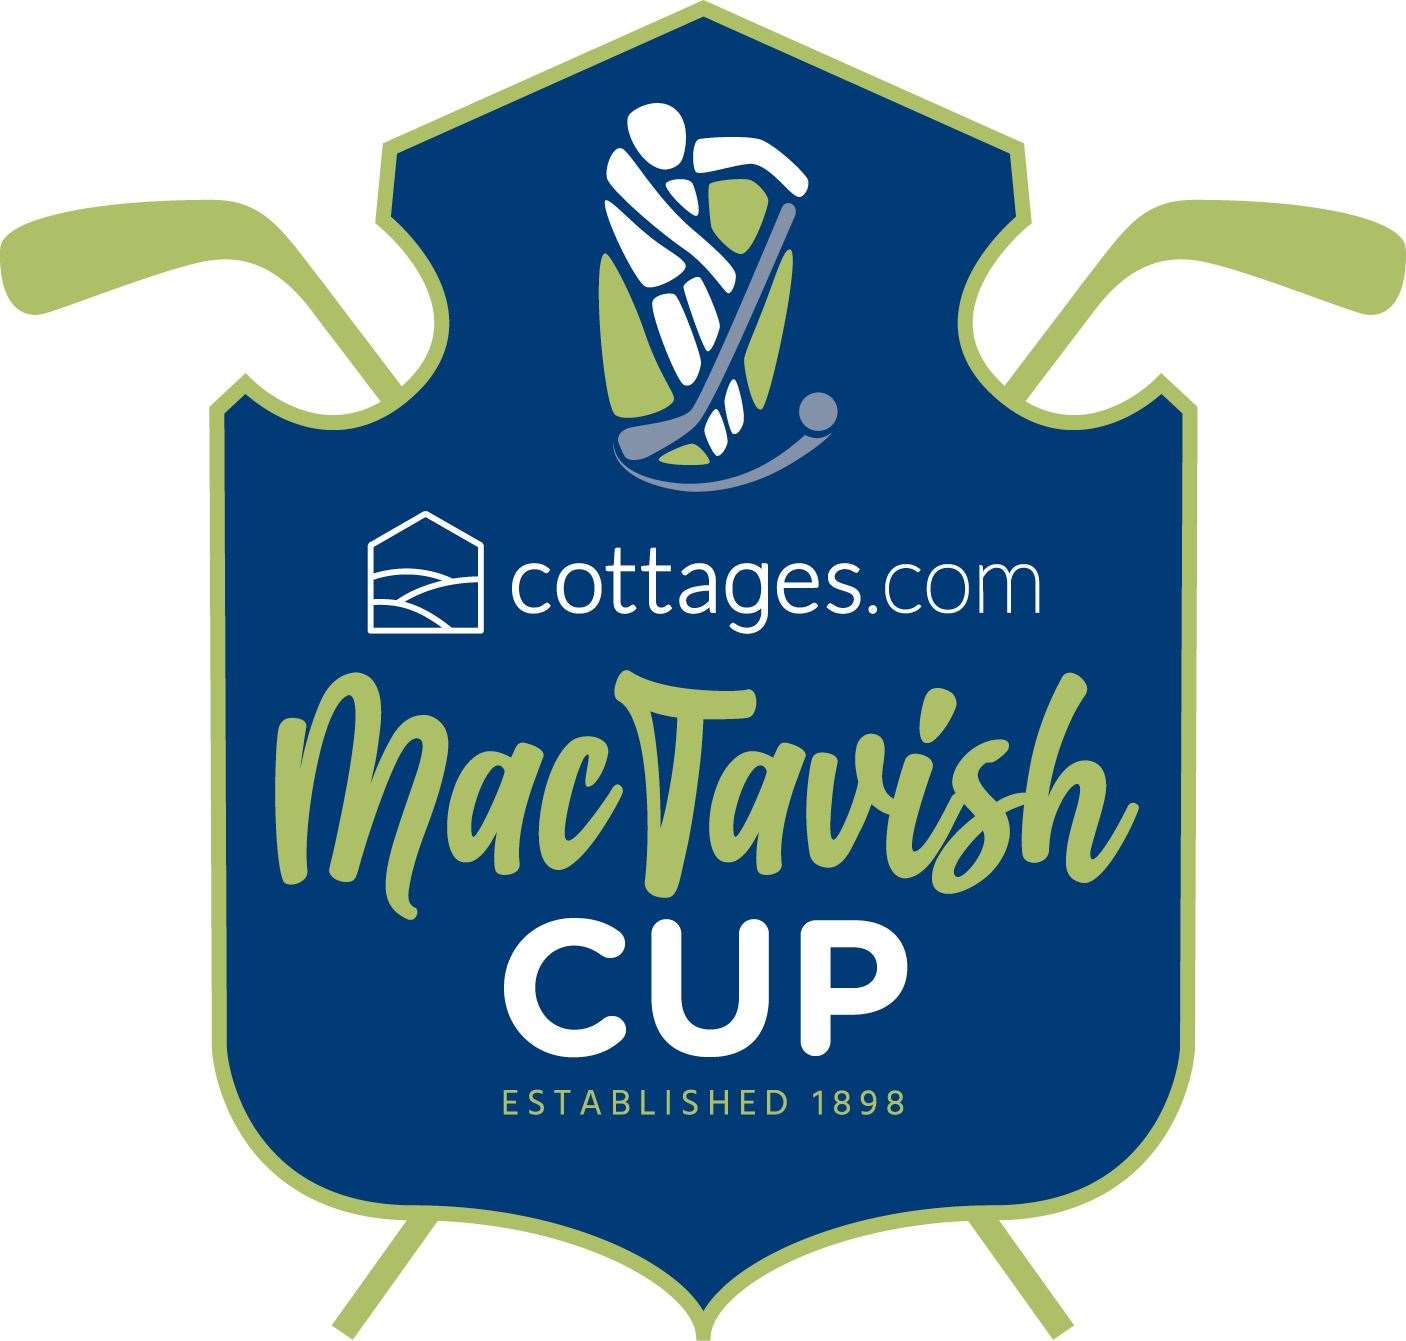 The MacTavish Cup opening round takes place this weekend.